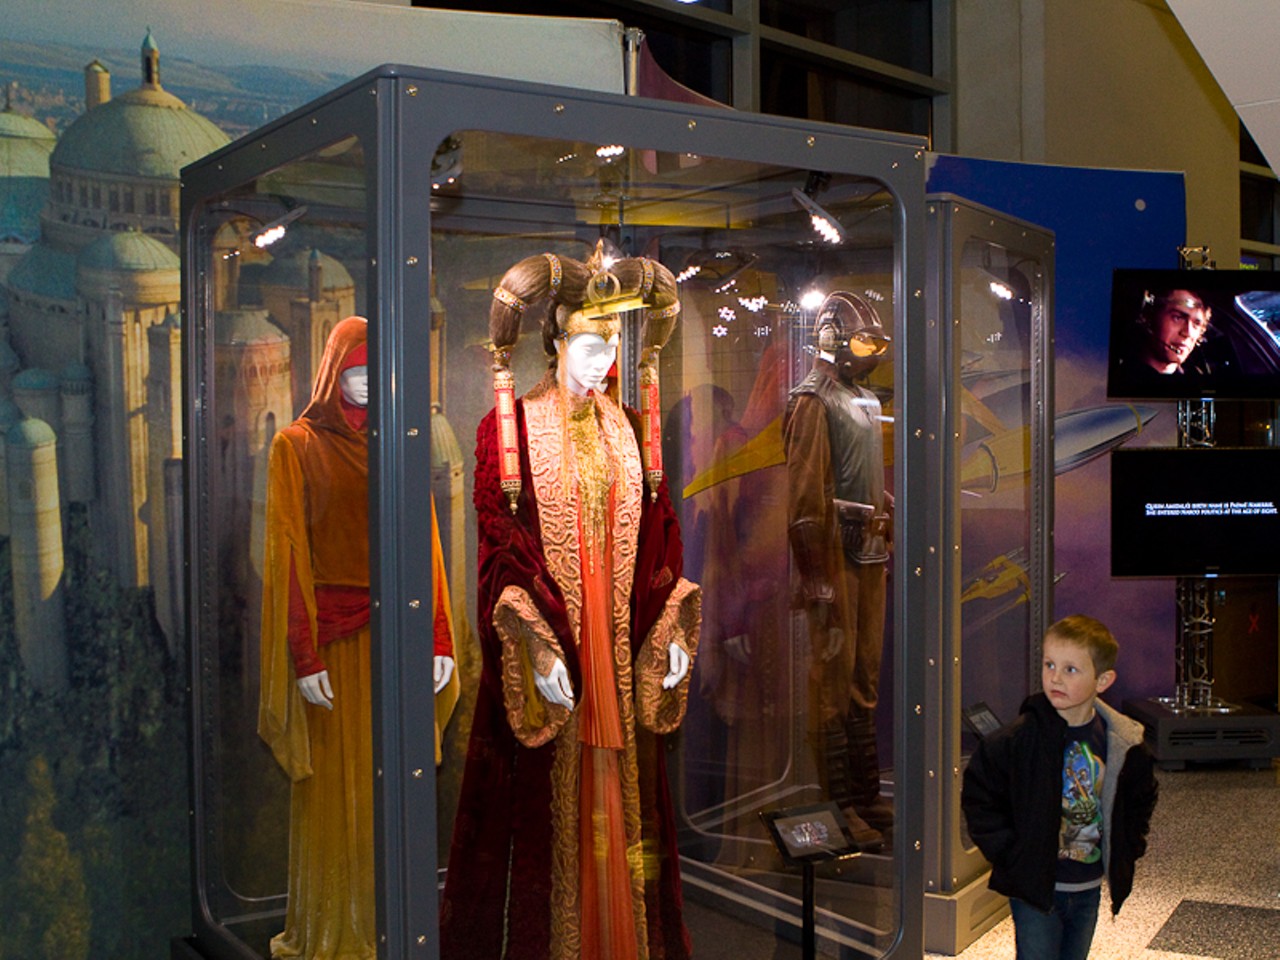 A young fan admires Padme's outfit from the second Star Wars movie.